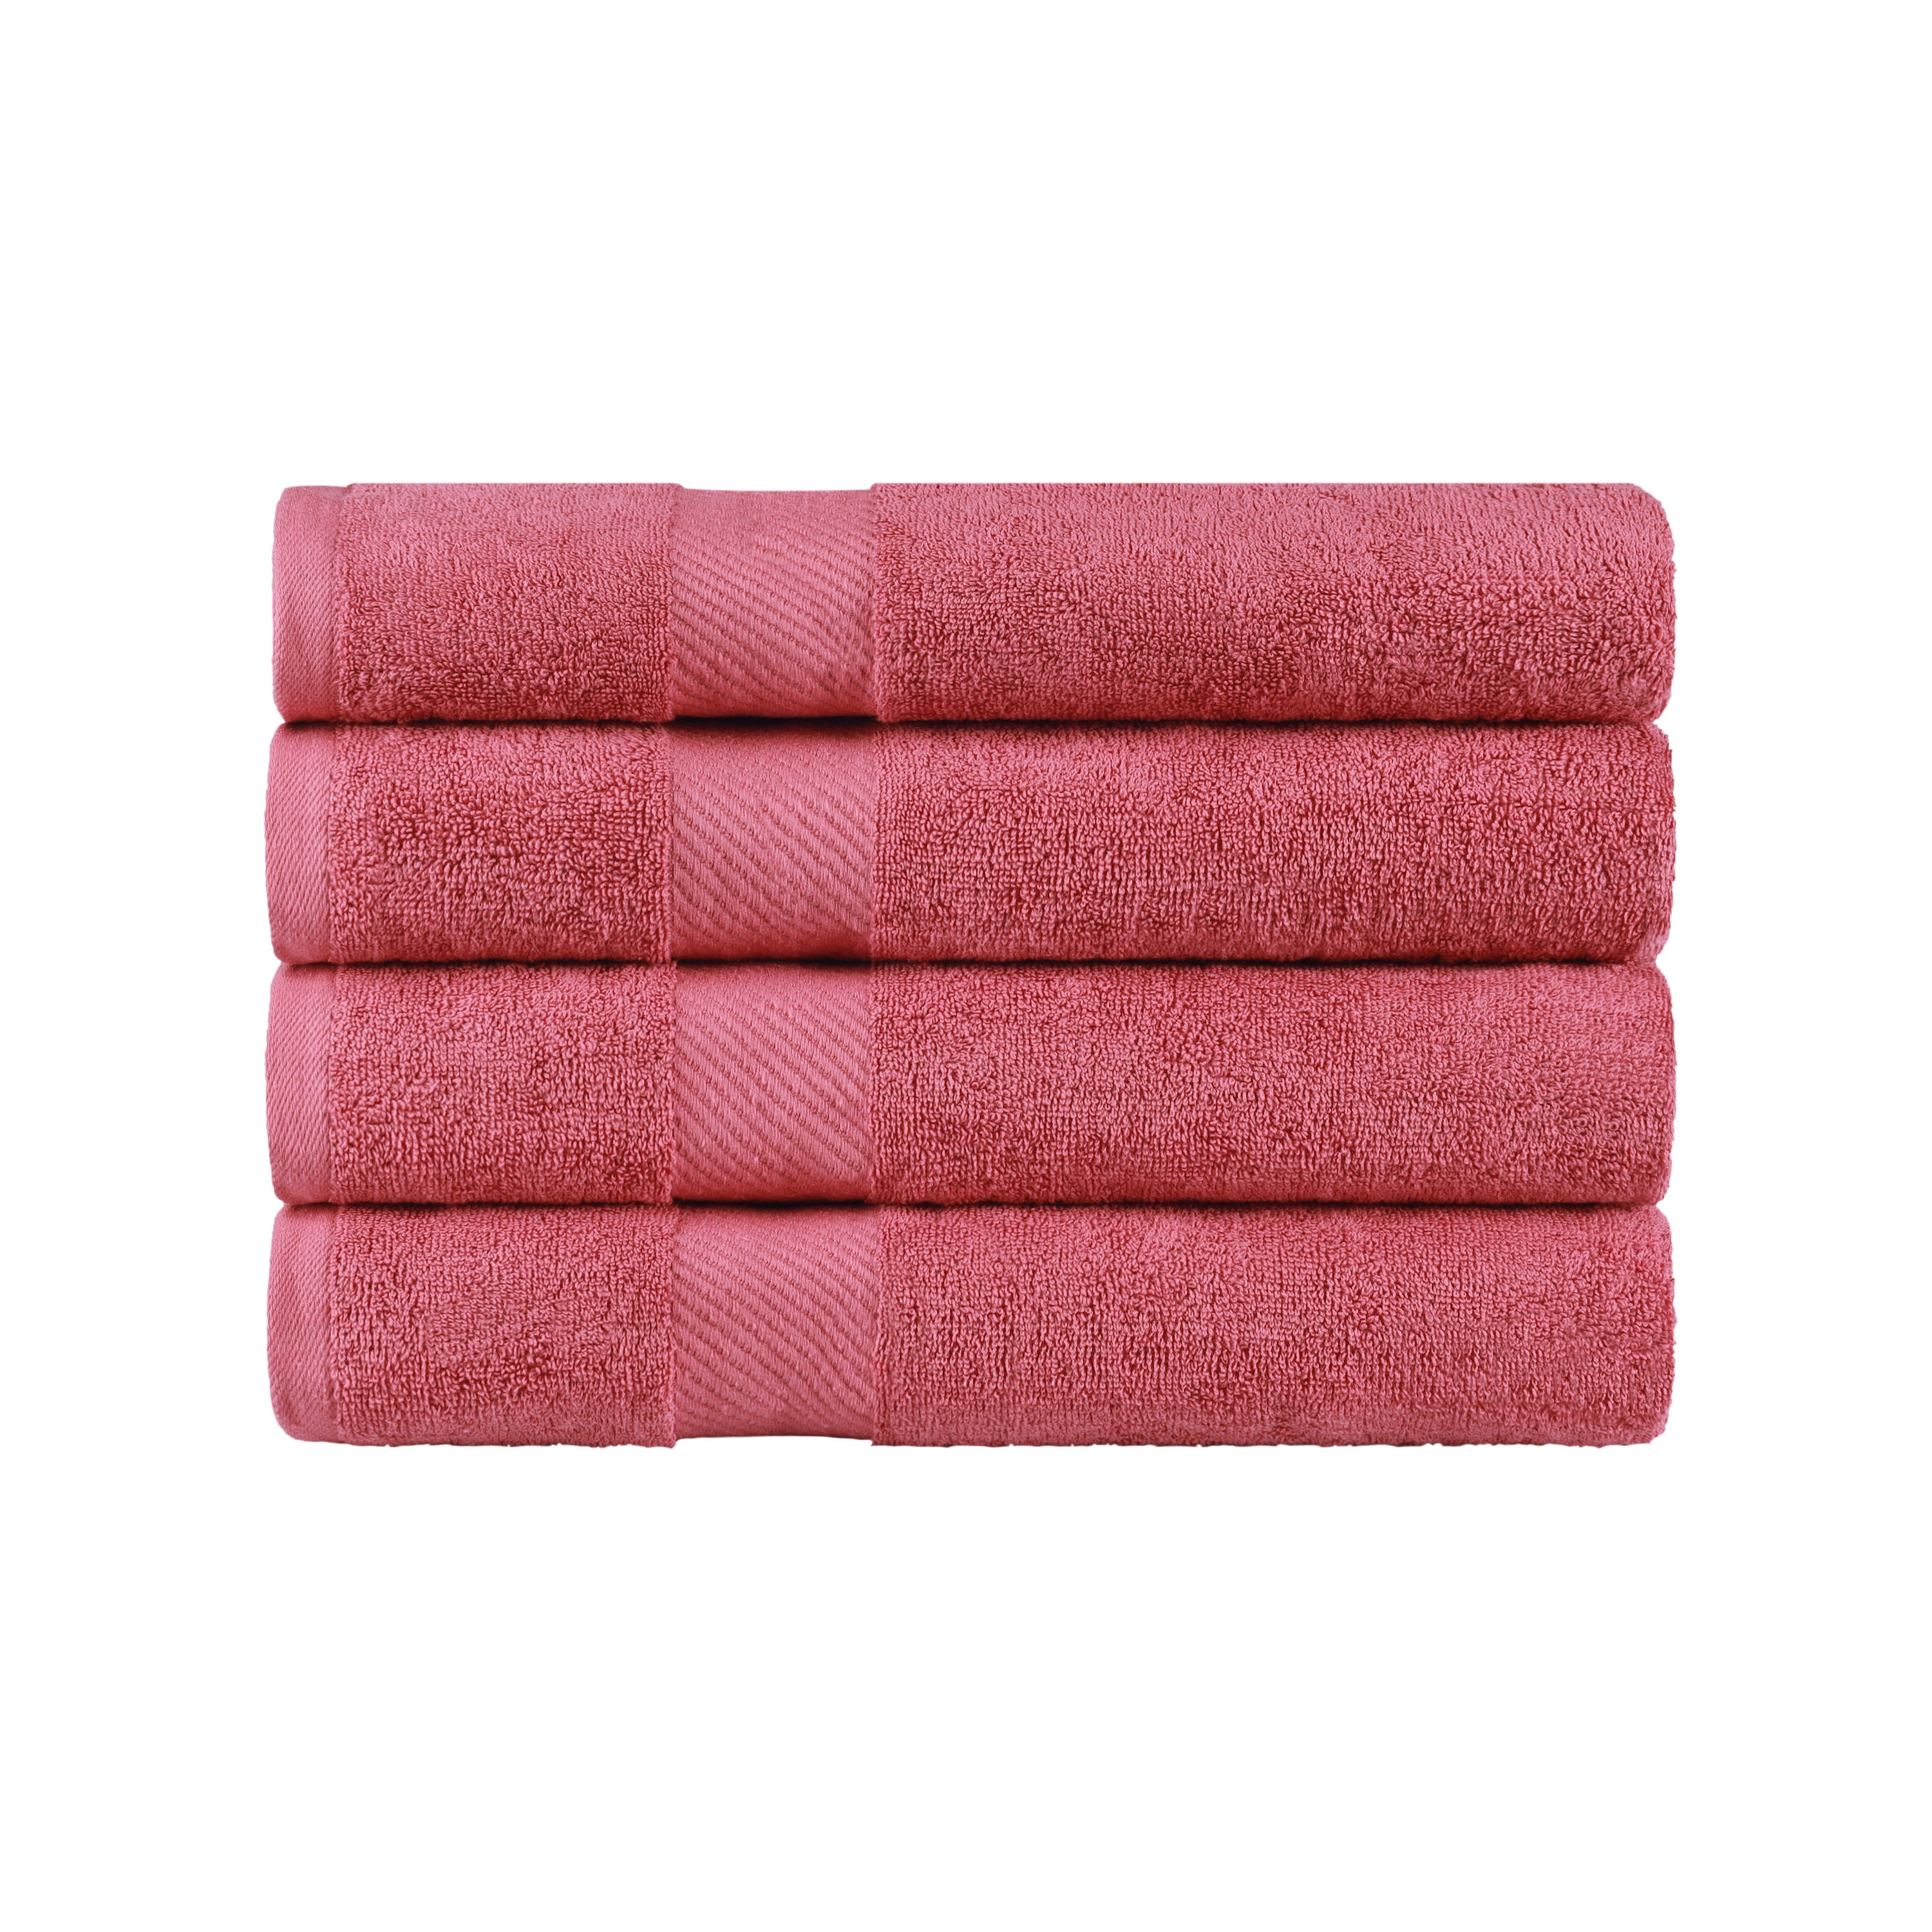 Dri Glo Egyptian Cotton Towel Collection - Nude Pink